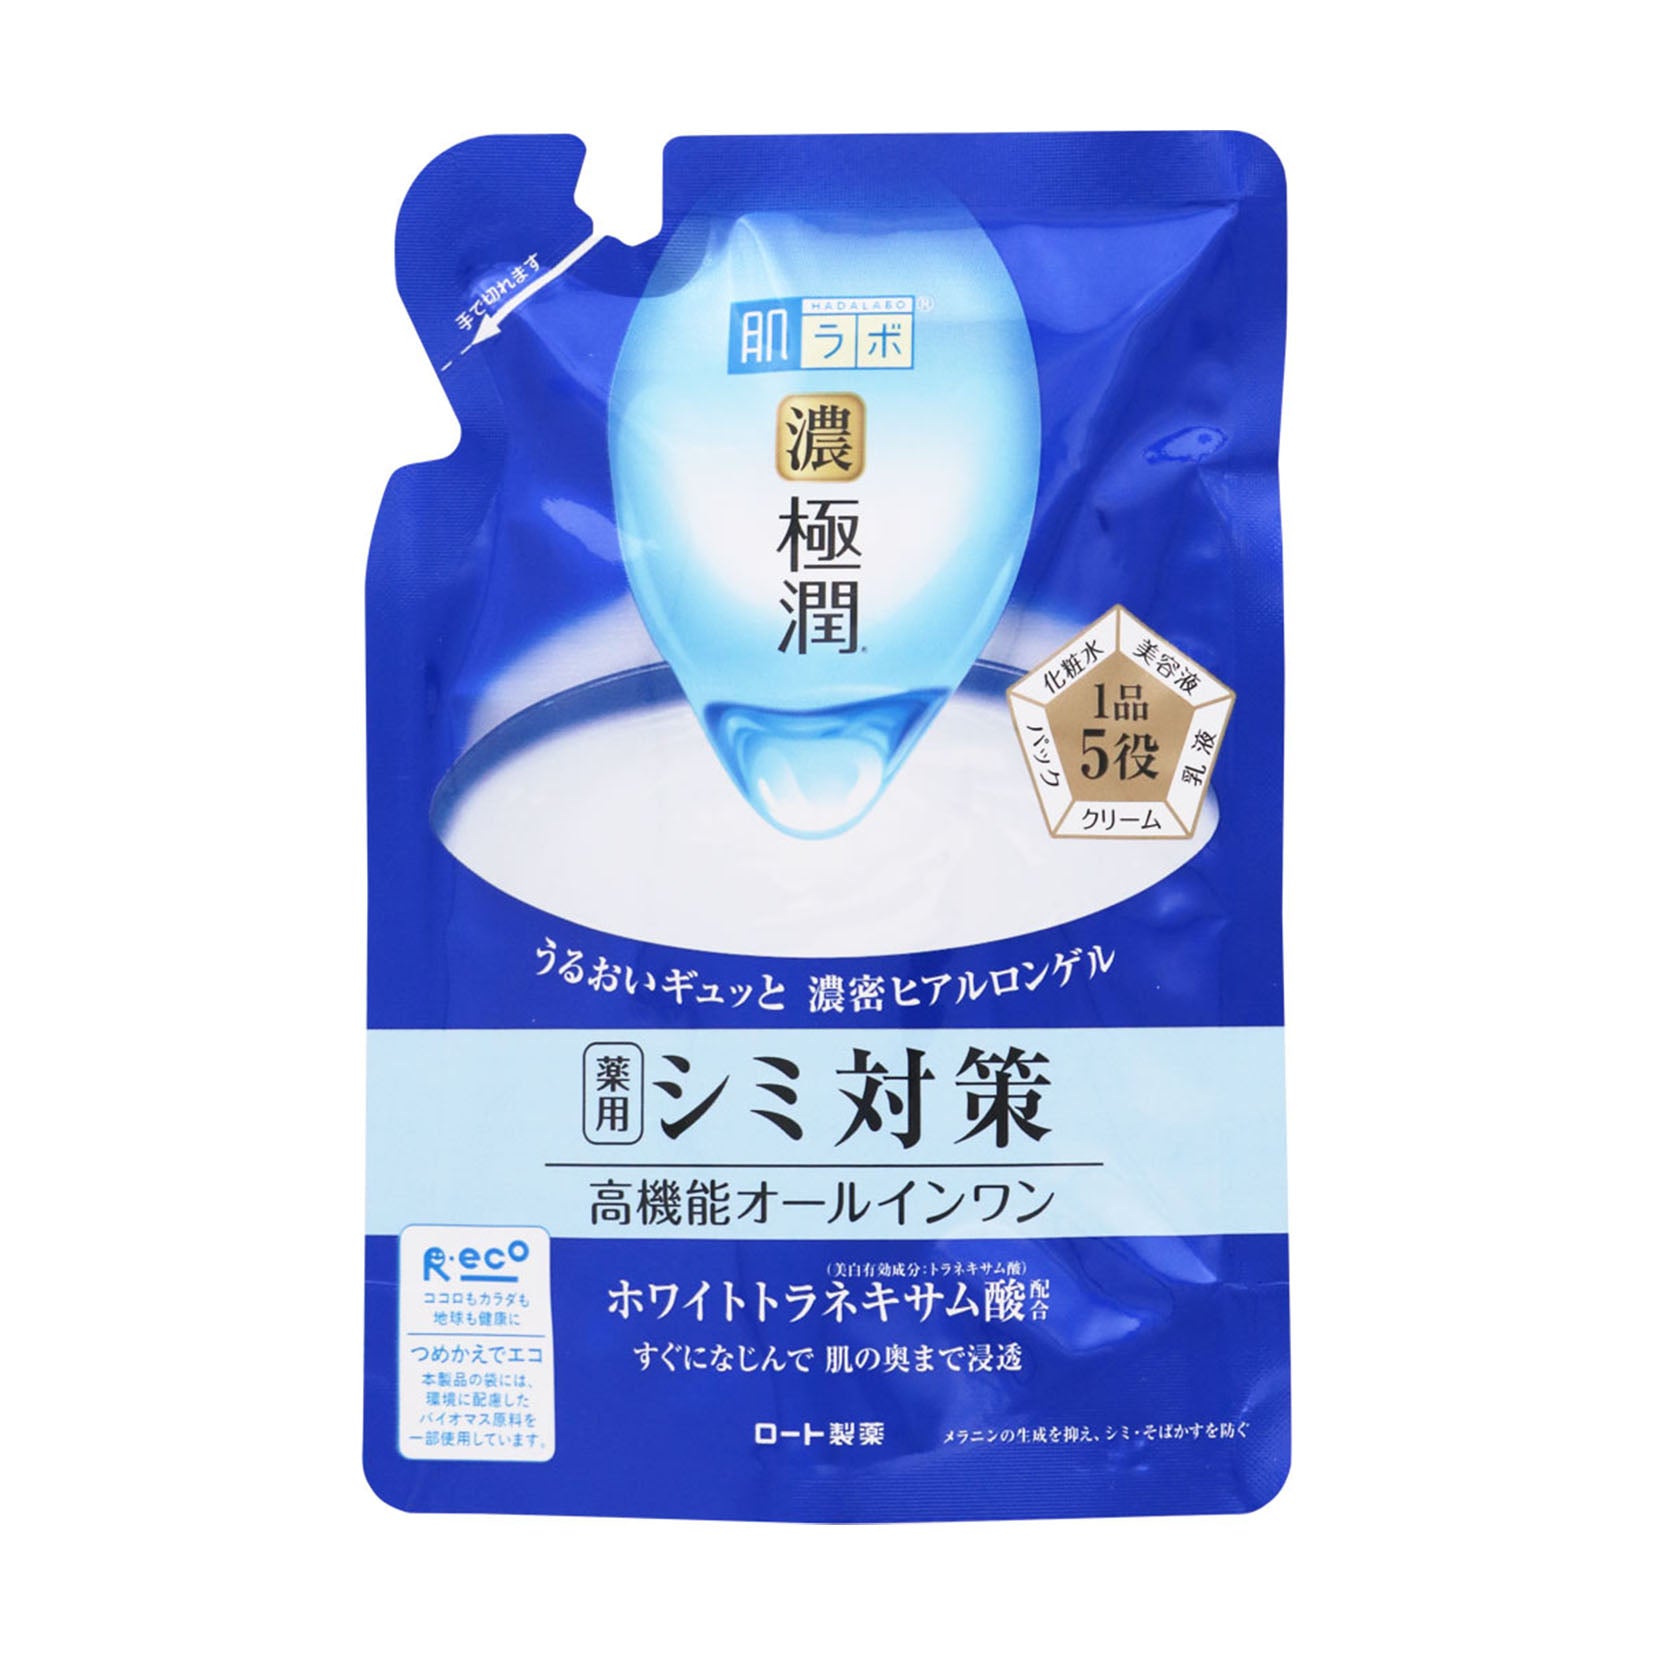 Rohto Hadalabo Gokujun Whitening All In One Perfect Gel - 80g - Refill - Harajuku Culture Japan - Japanease Products Store Beauty and Stationery